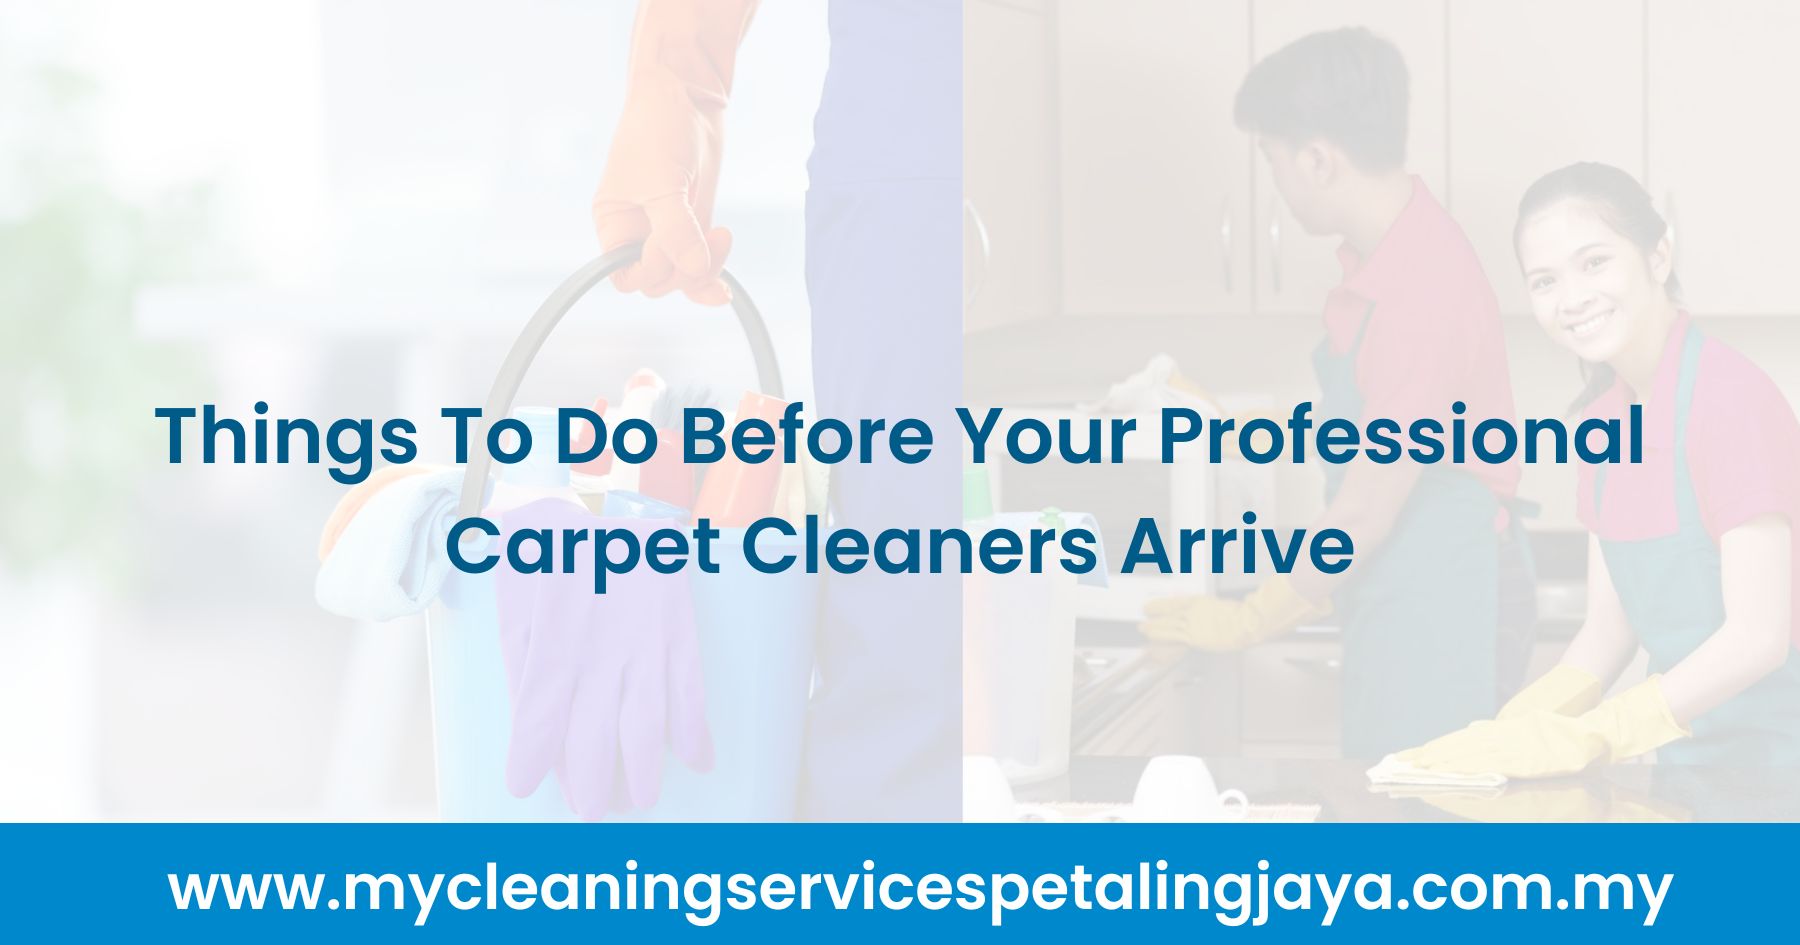 Things To Do Before Your Professional Carpet Cleaners Arrive